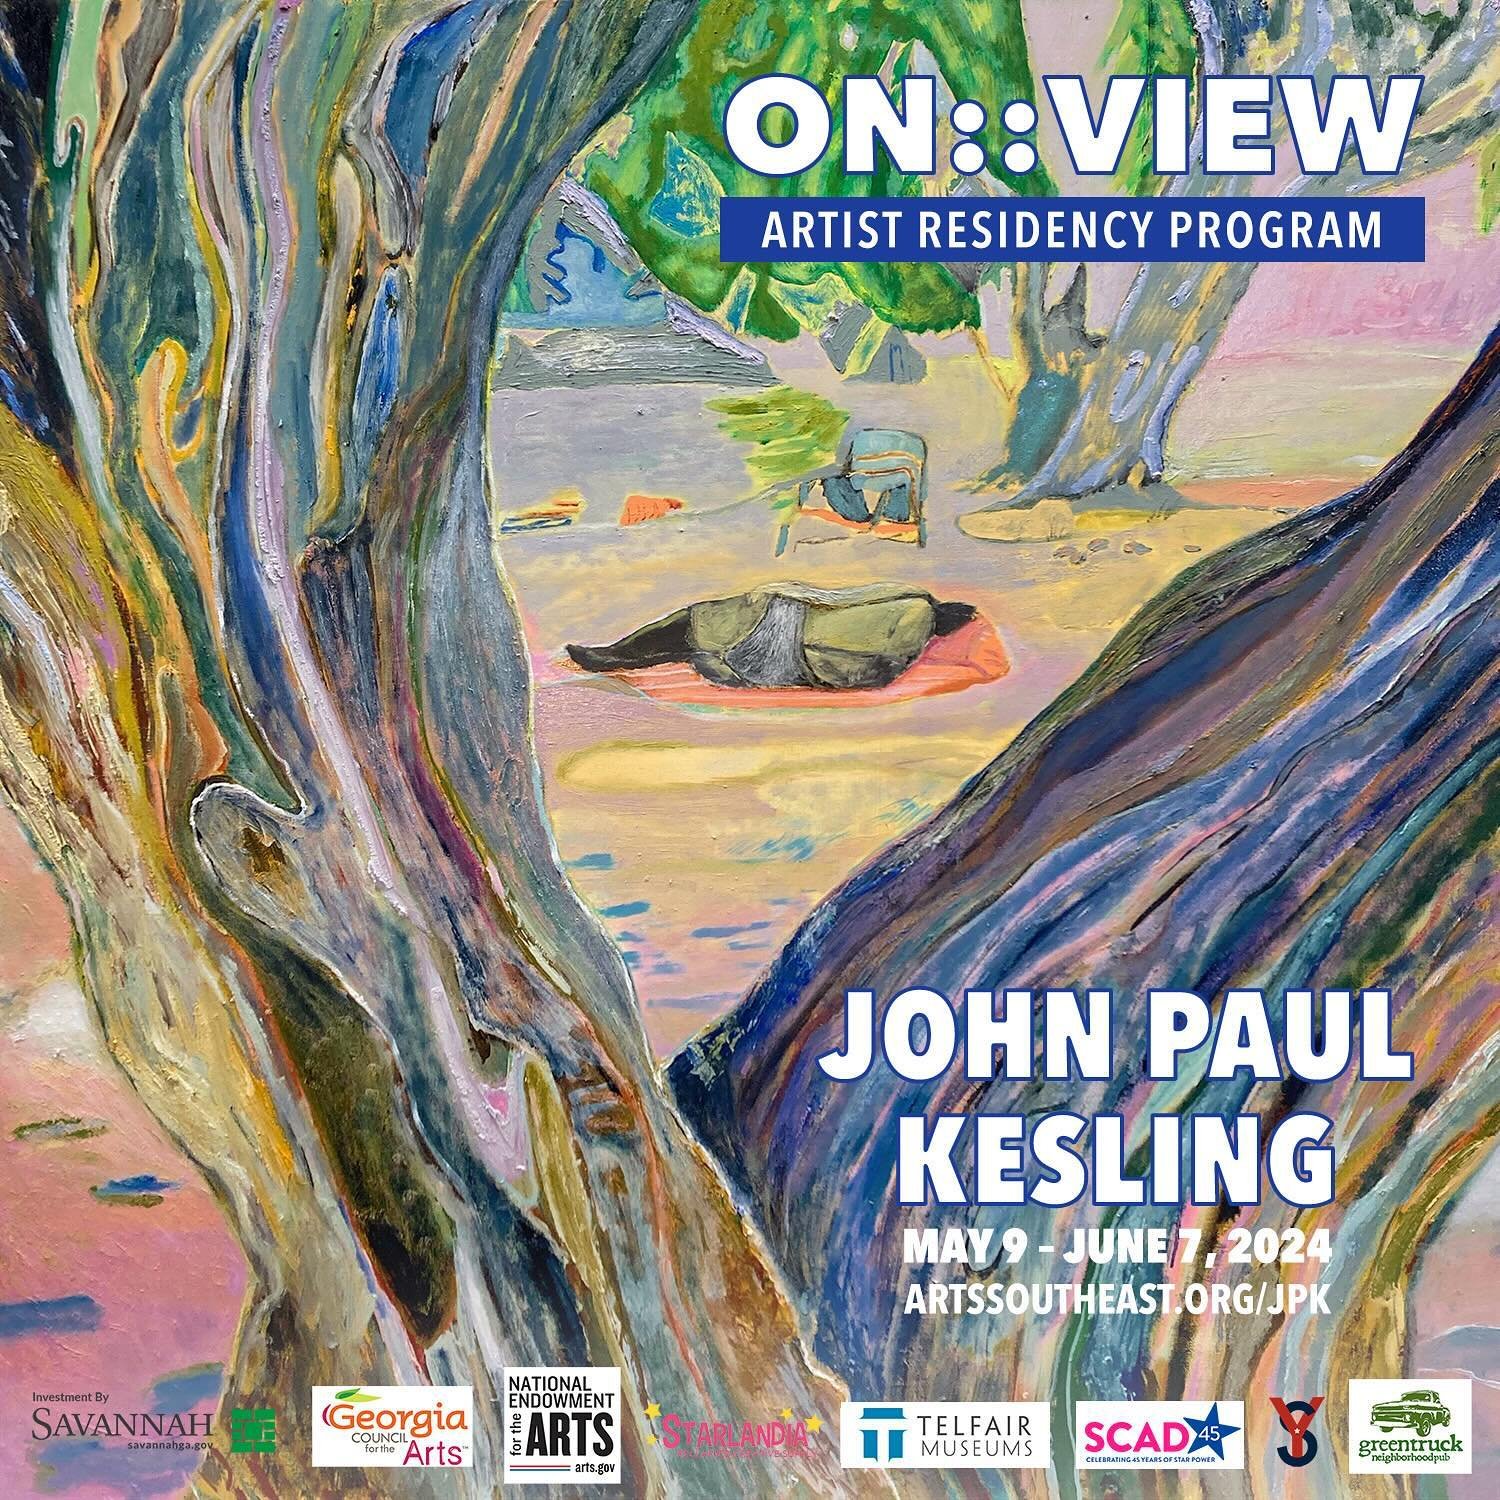 Up Next in the @onviewresidency: @johnpaulkesling (Nashville, TN)

May 9 &ndash; Jun 7, 2024

Artist Talk: Sat, Jun 1 at 2PM

Project Finale: Fri, June 7 from 5 - 9PM in conjunction with #FirstFridaysInStarland and the release of @impact.magazine.sav